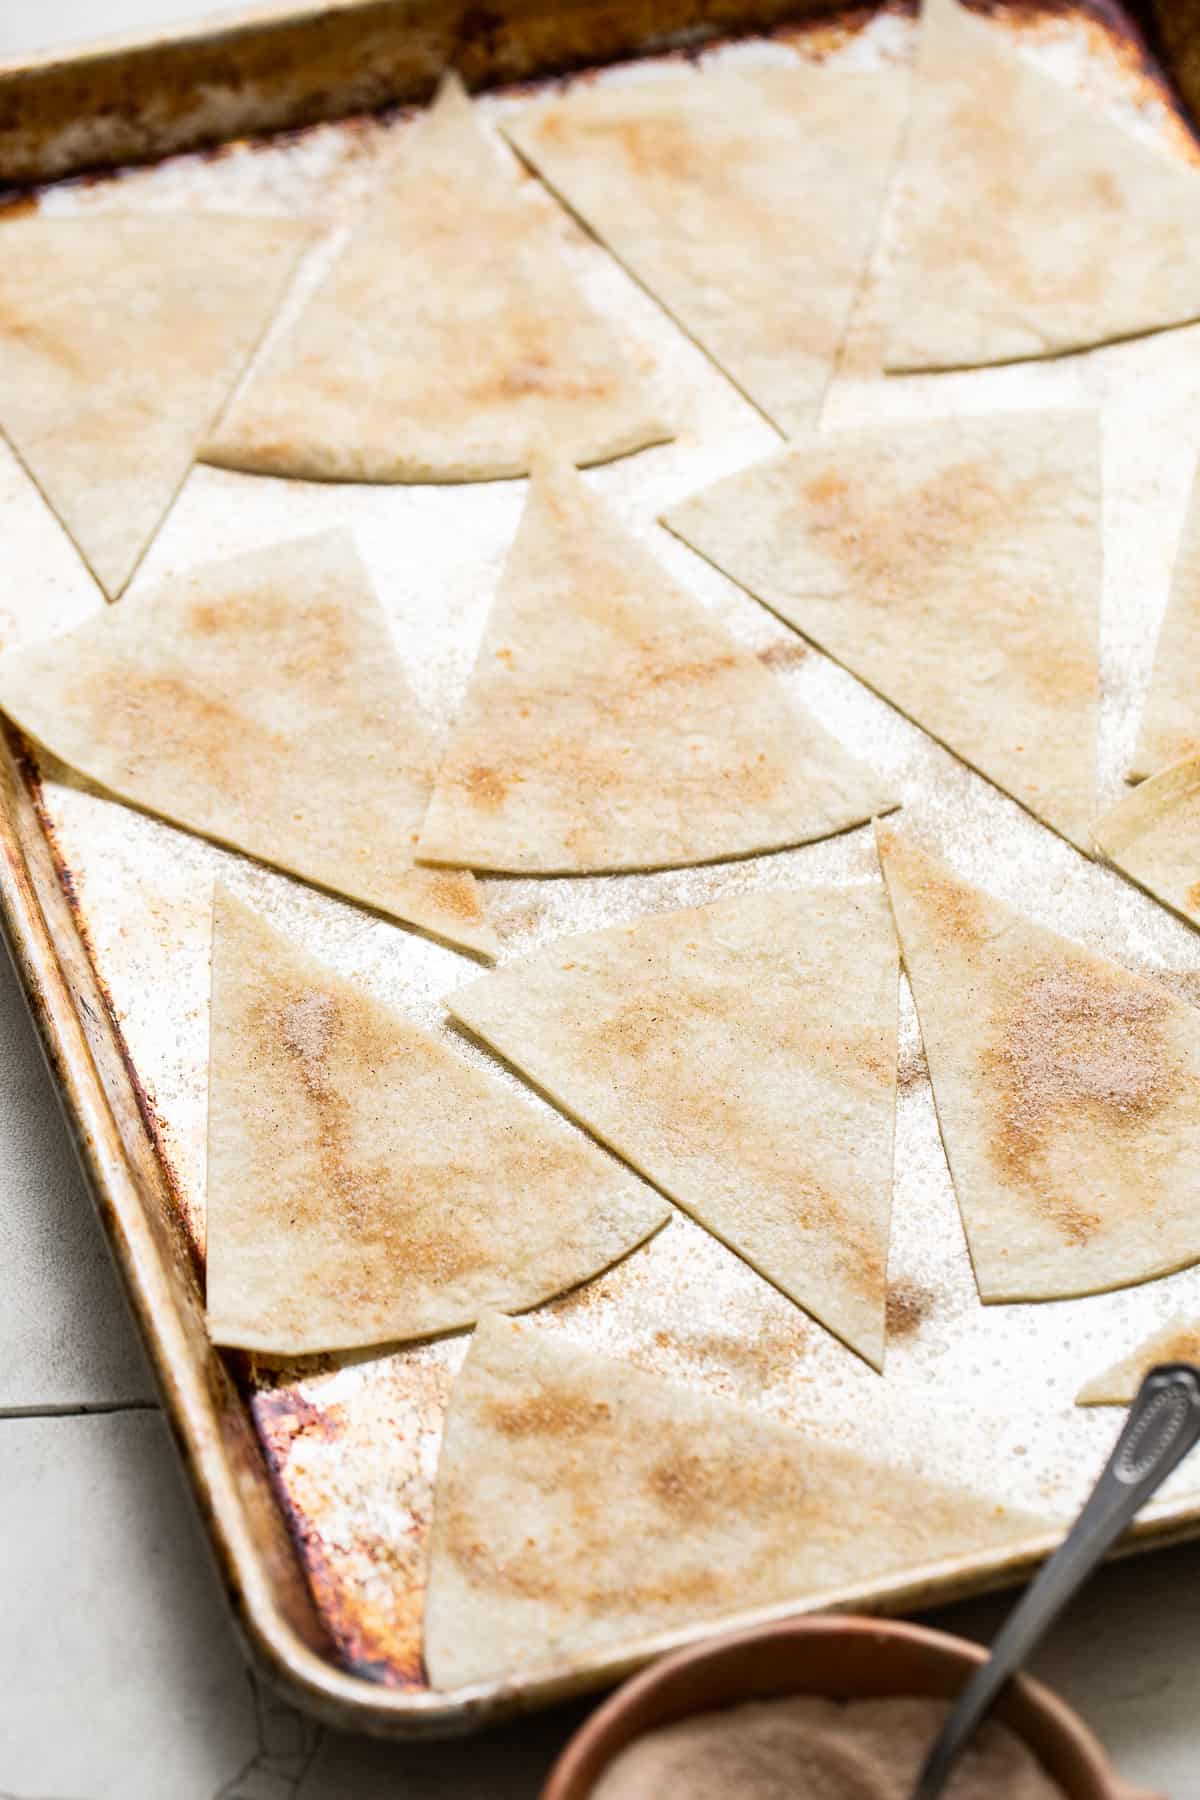 Flour tortillas sliced into triangles and sprinkled with cinnamon sugar.